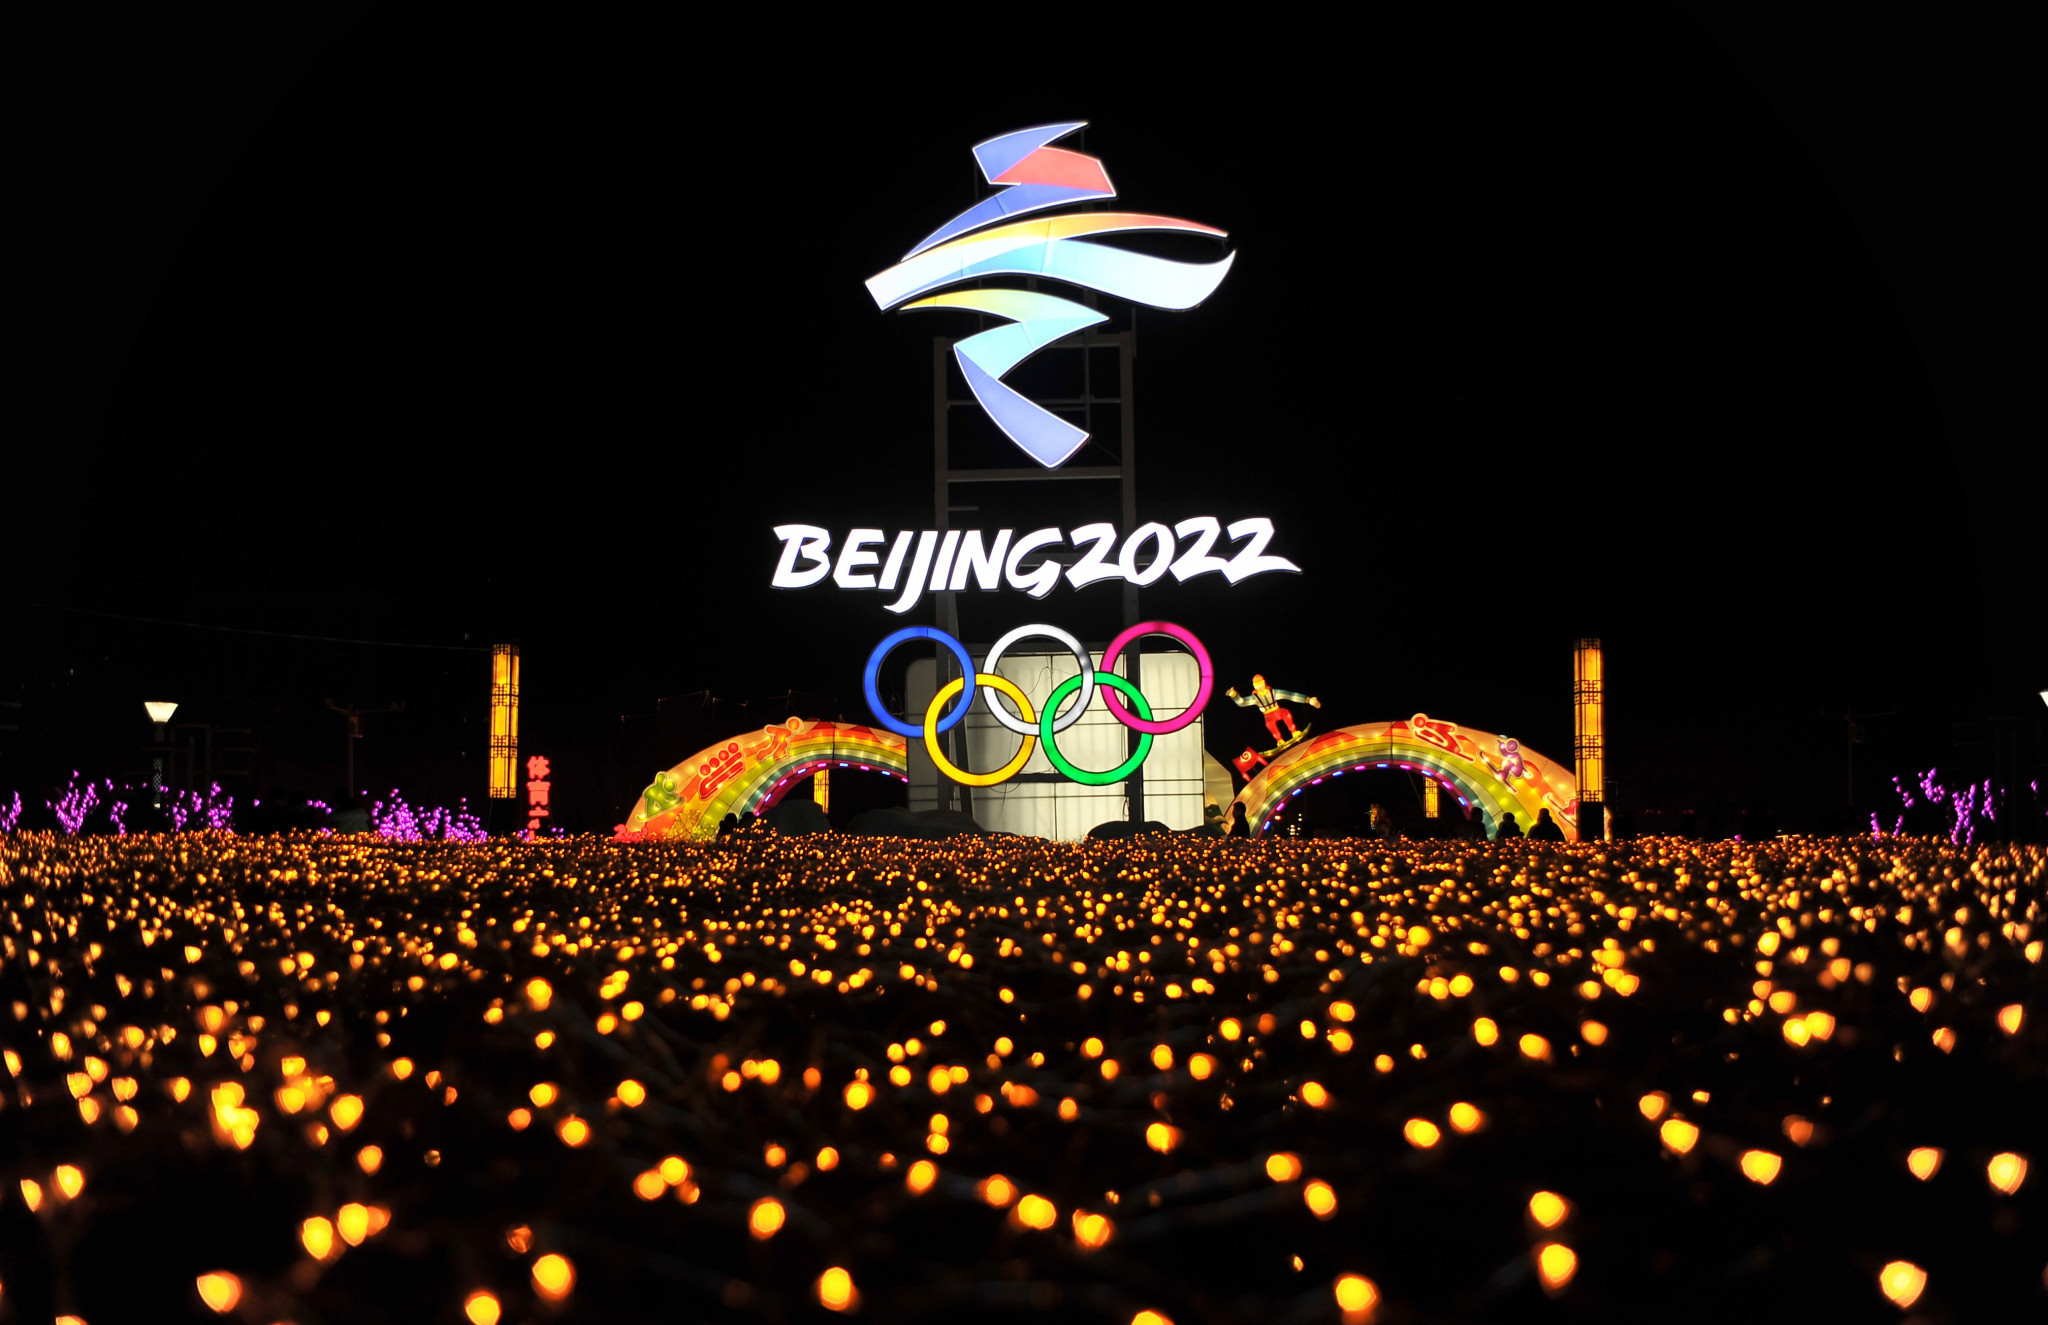 China is continuing its drive to improve in winter sports leading up to Beijing 2022 Olympic and Paralympic Games ©Getty Images